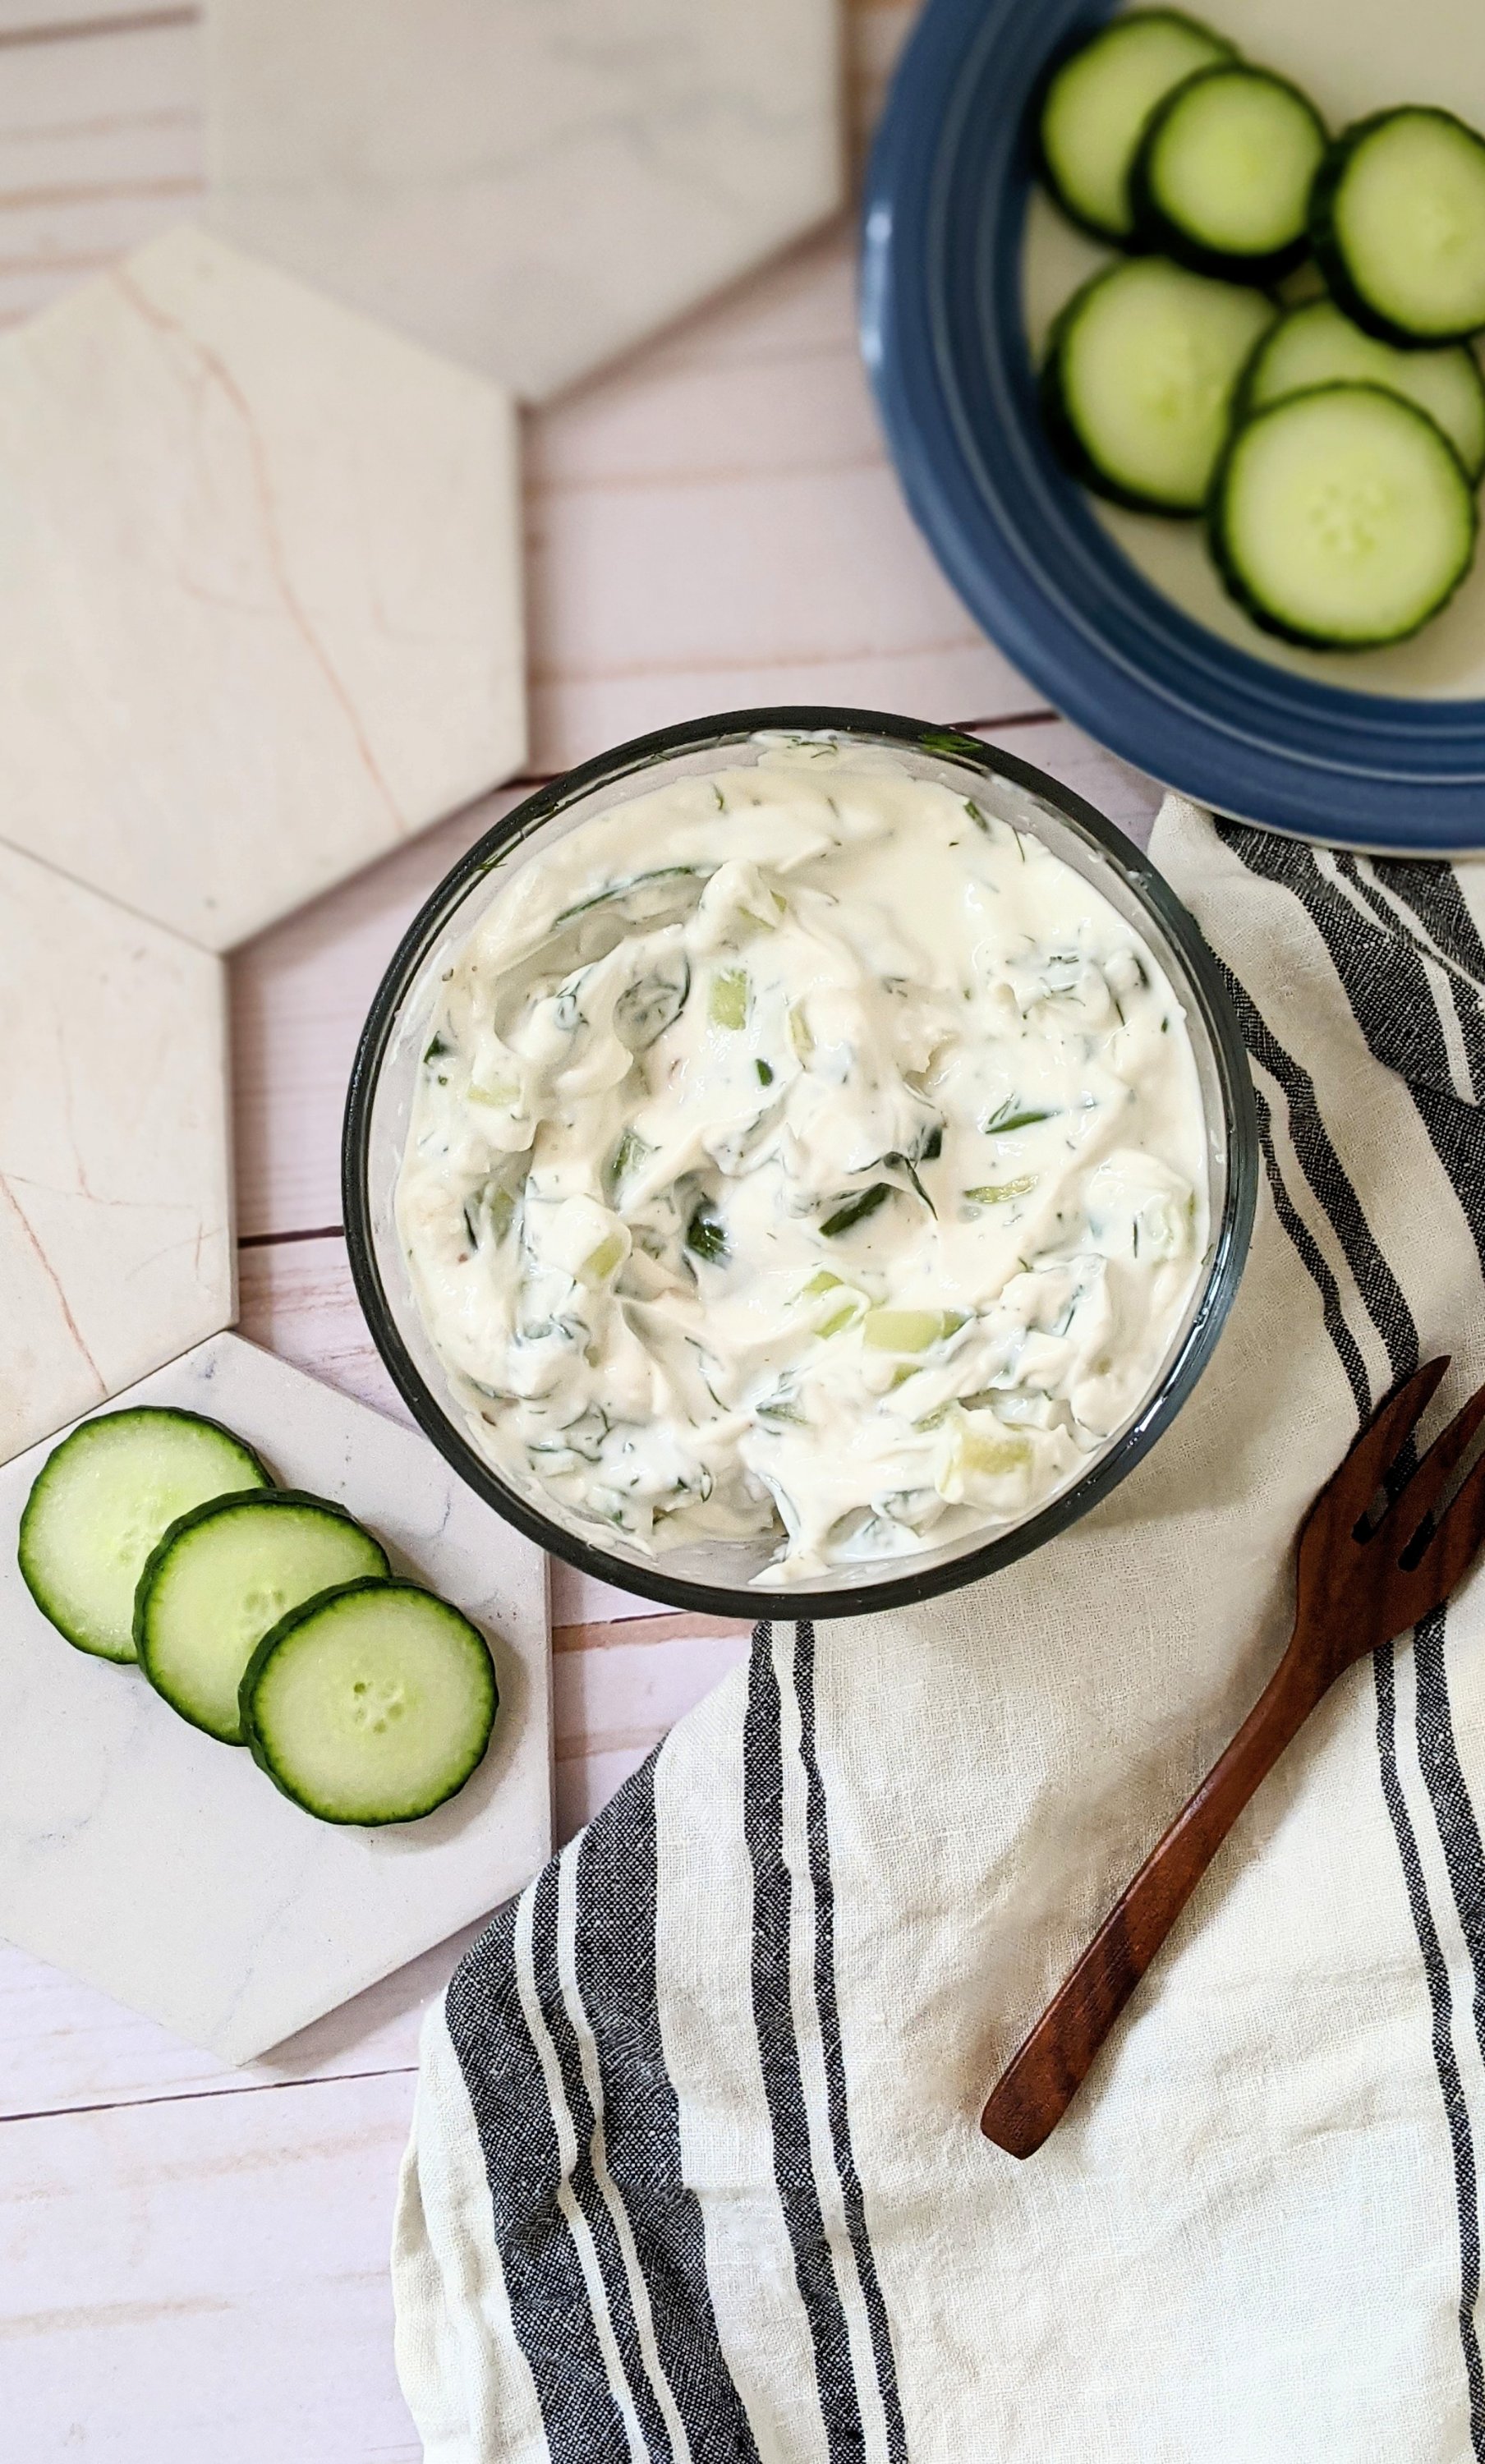 tzatziki with sour cream dill yogurt cucumbers and fresh chopped herbs on a plate with freshly sliced cucumbers and a fork.